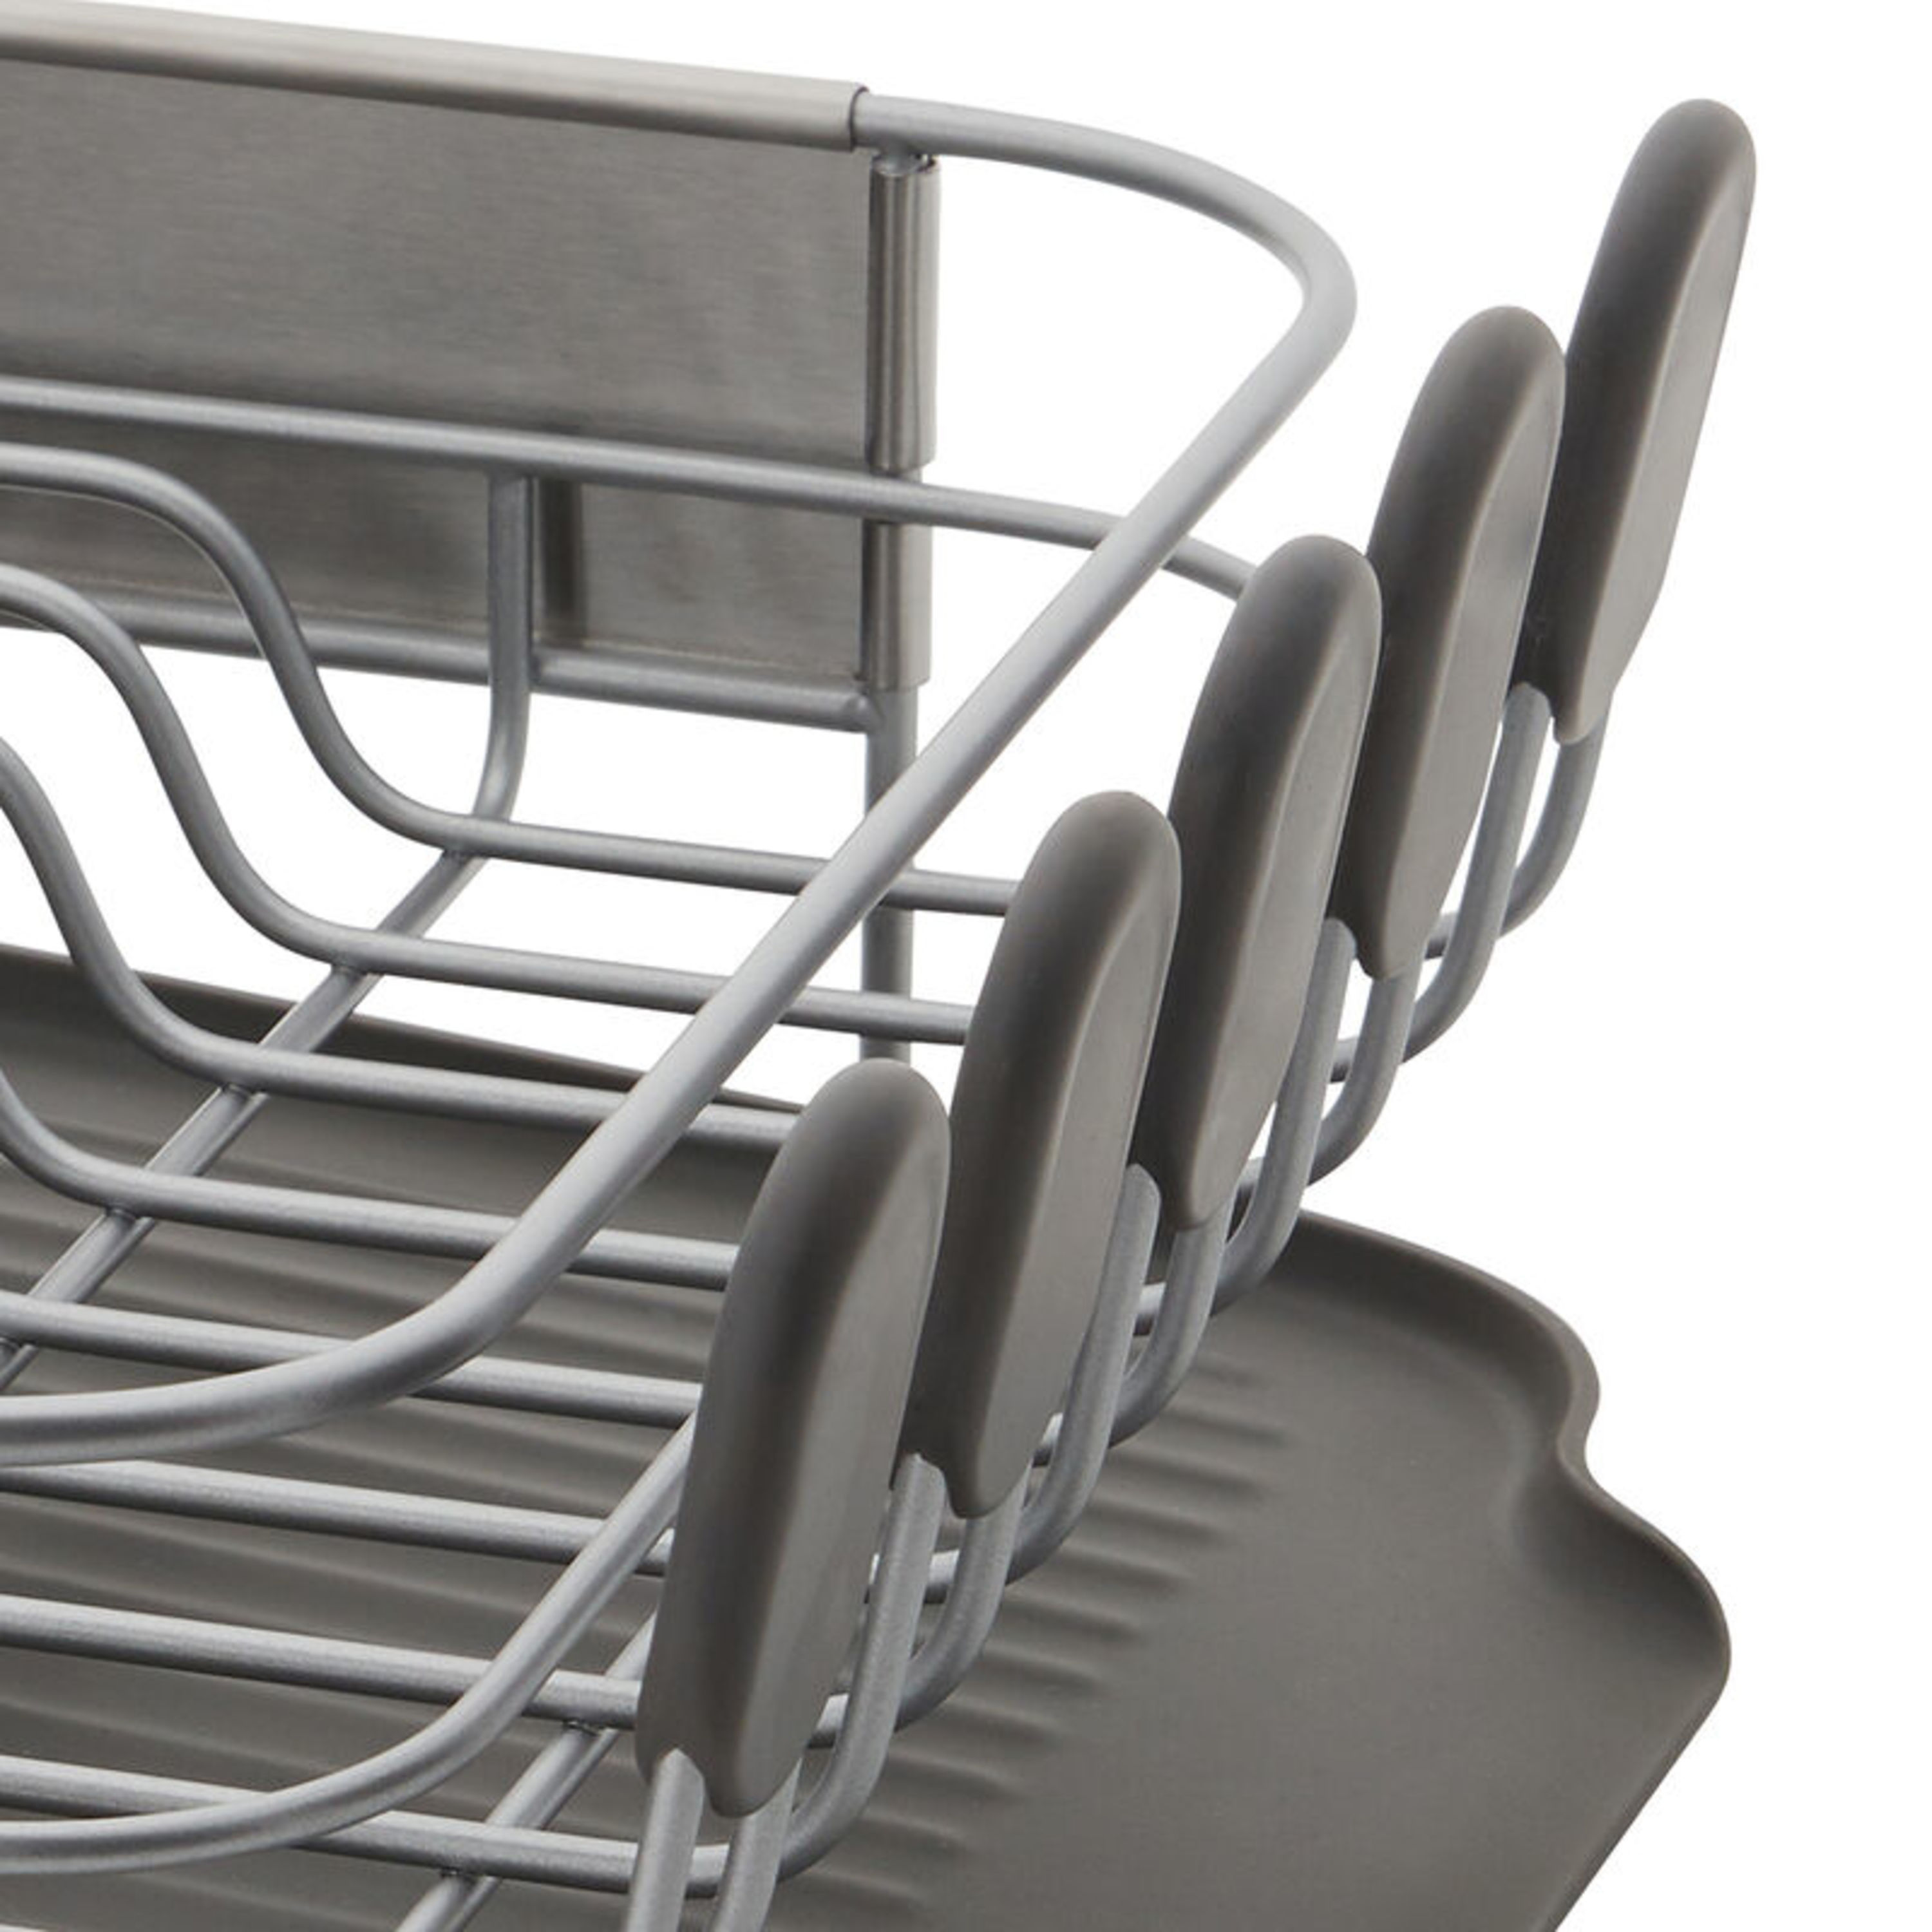 Kitchenaid Stainless Steel Wrap Compact Dish Rack in Satin Gray - image 5 of 9